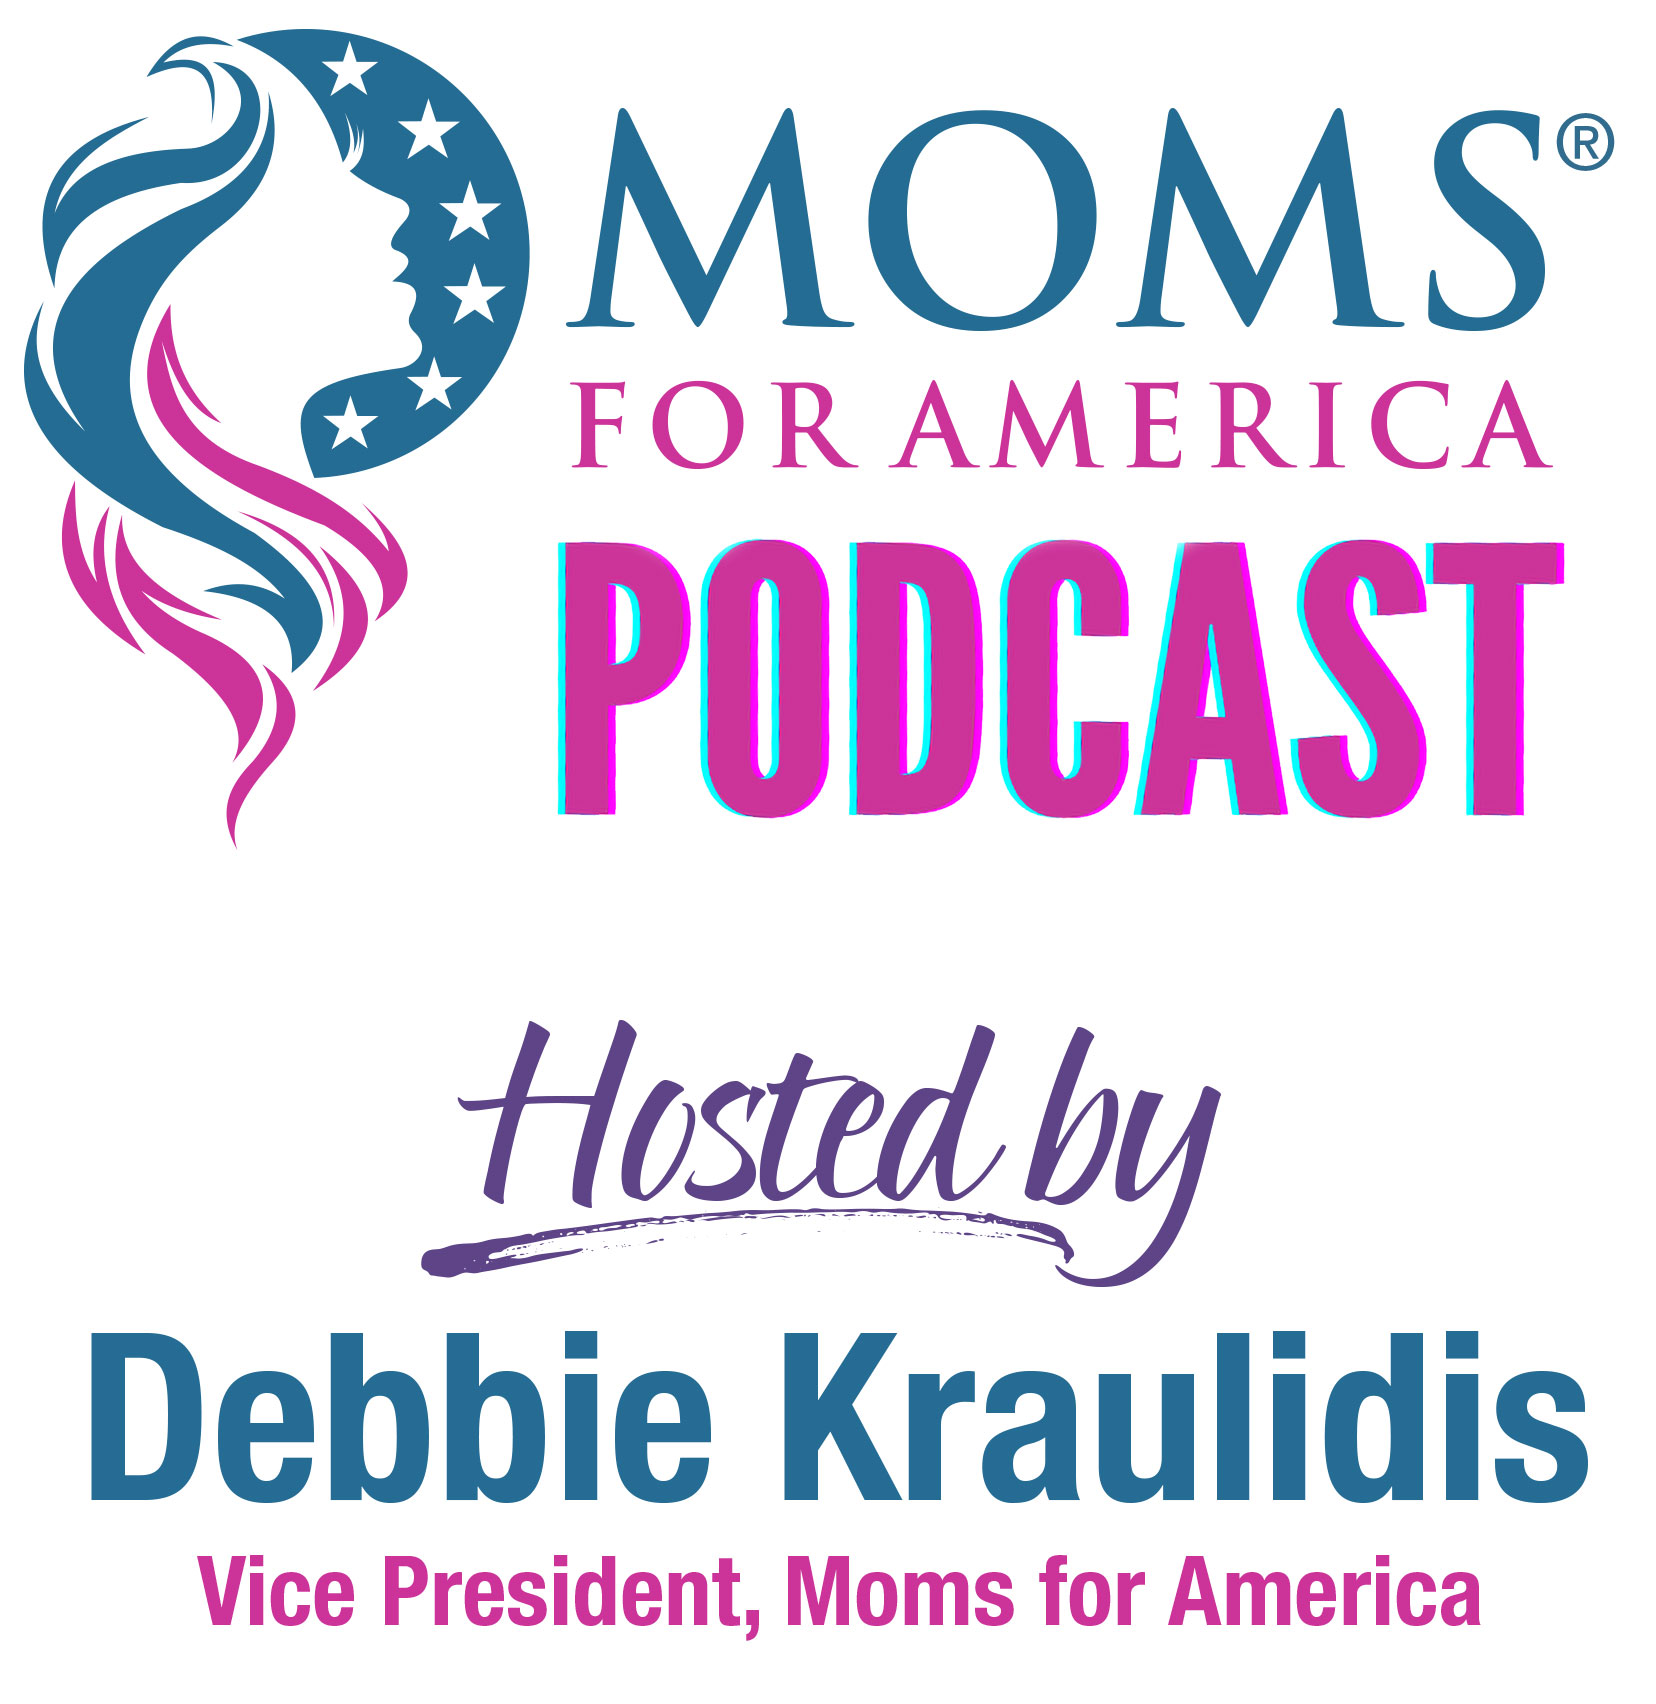 Moms for America - Podcast Hosted by Debbie Kraulidis